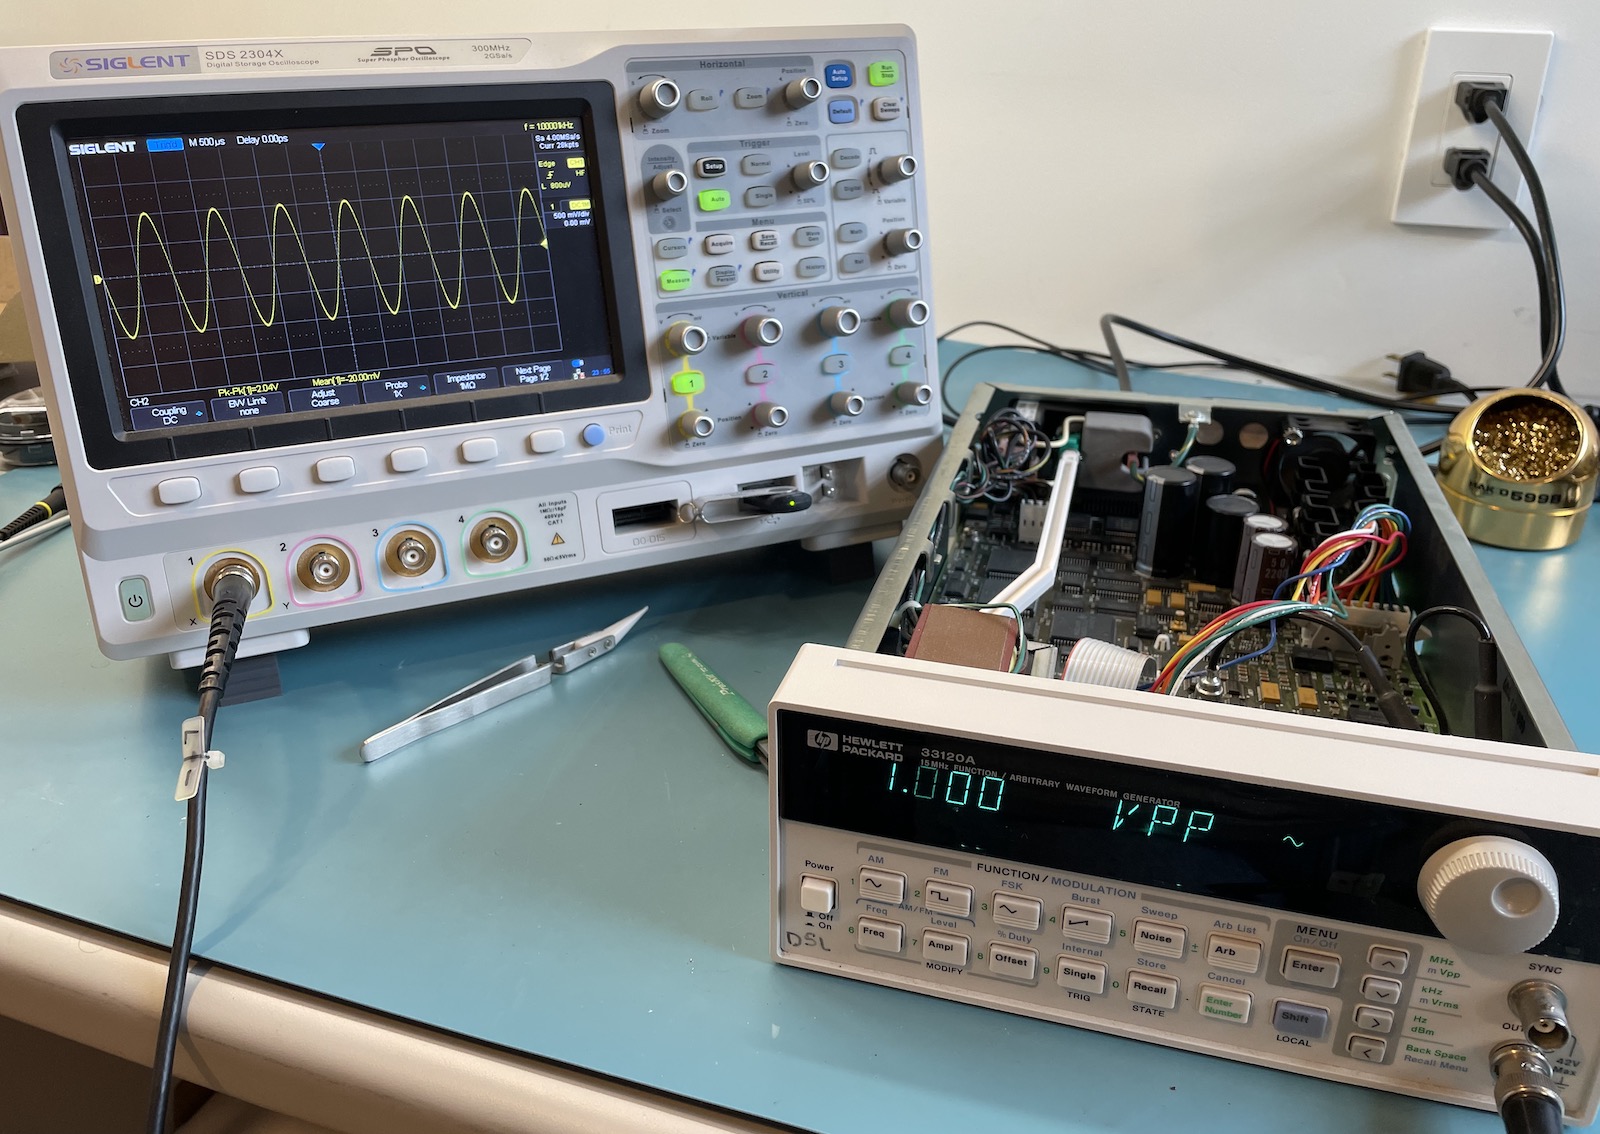 Oscilloscope with repaired unit